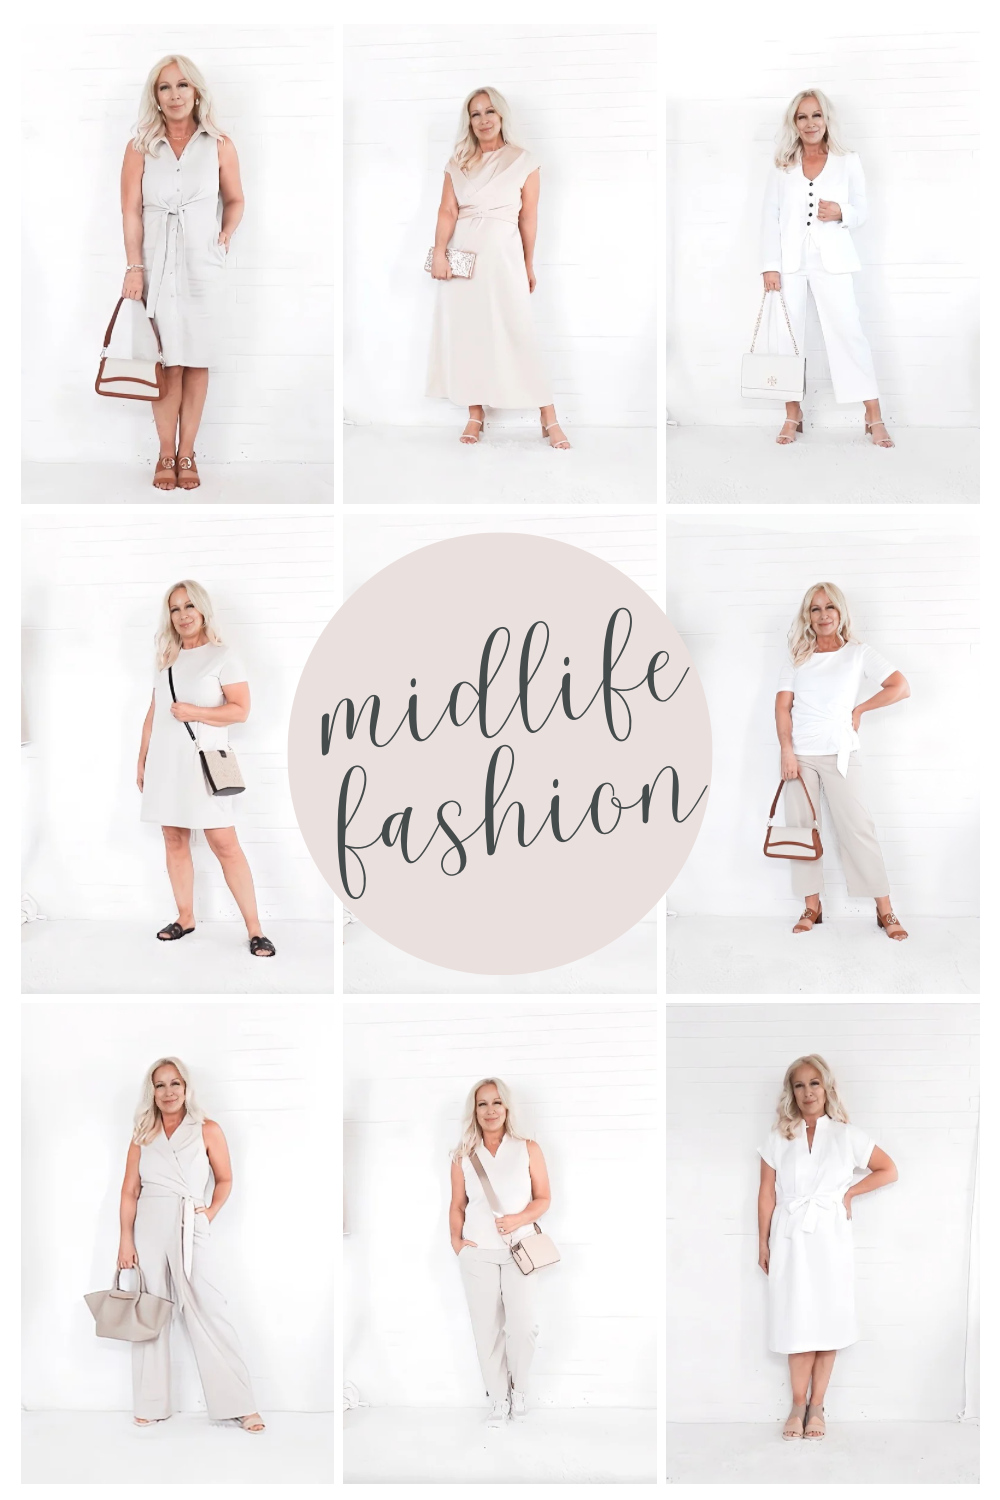 Why would a busy lawyer start a fashion blog for midlife women?